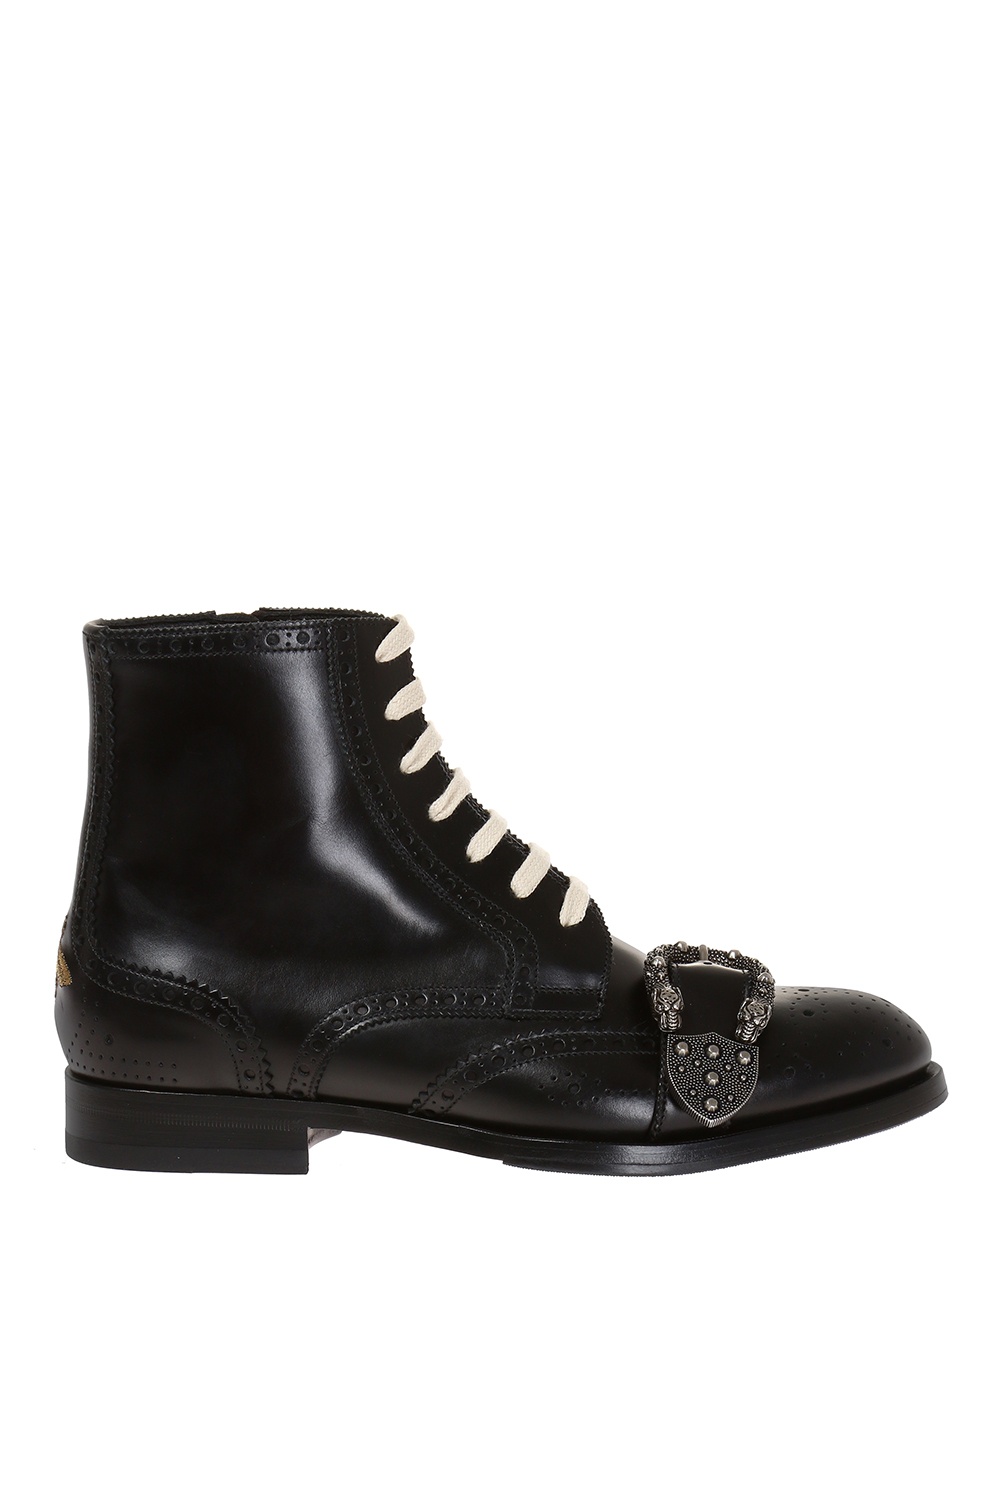 Queercore' ankle boots Gucci - Vitkac HK